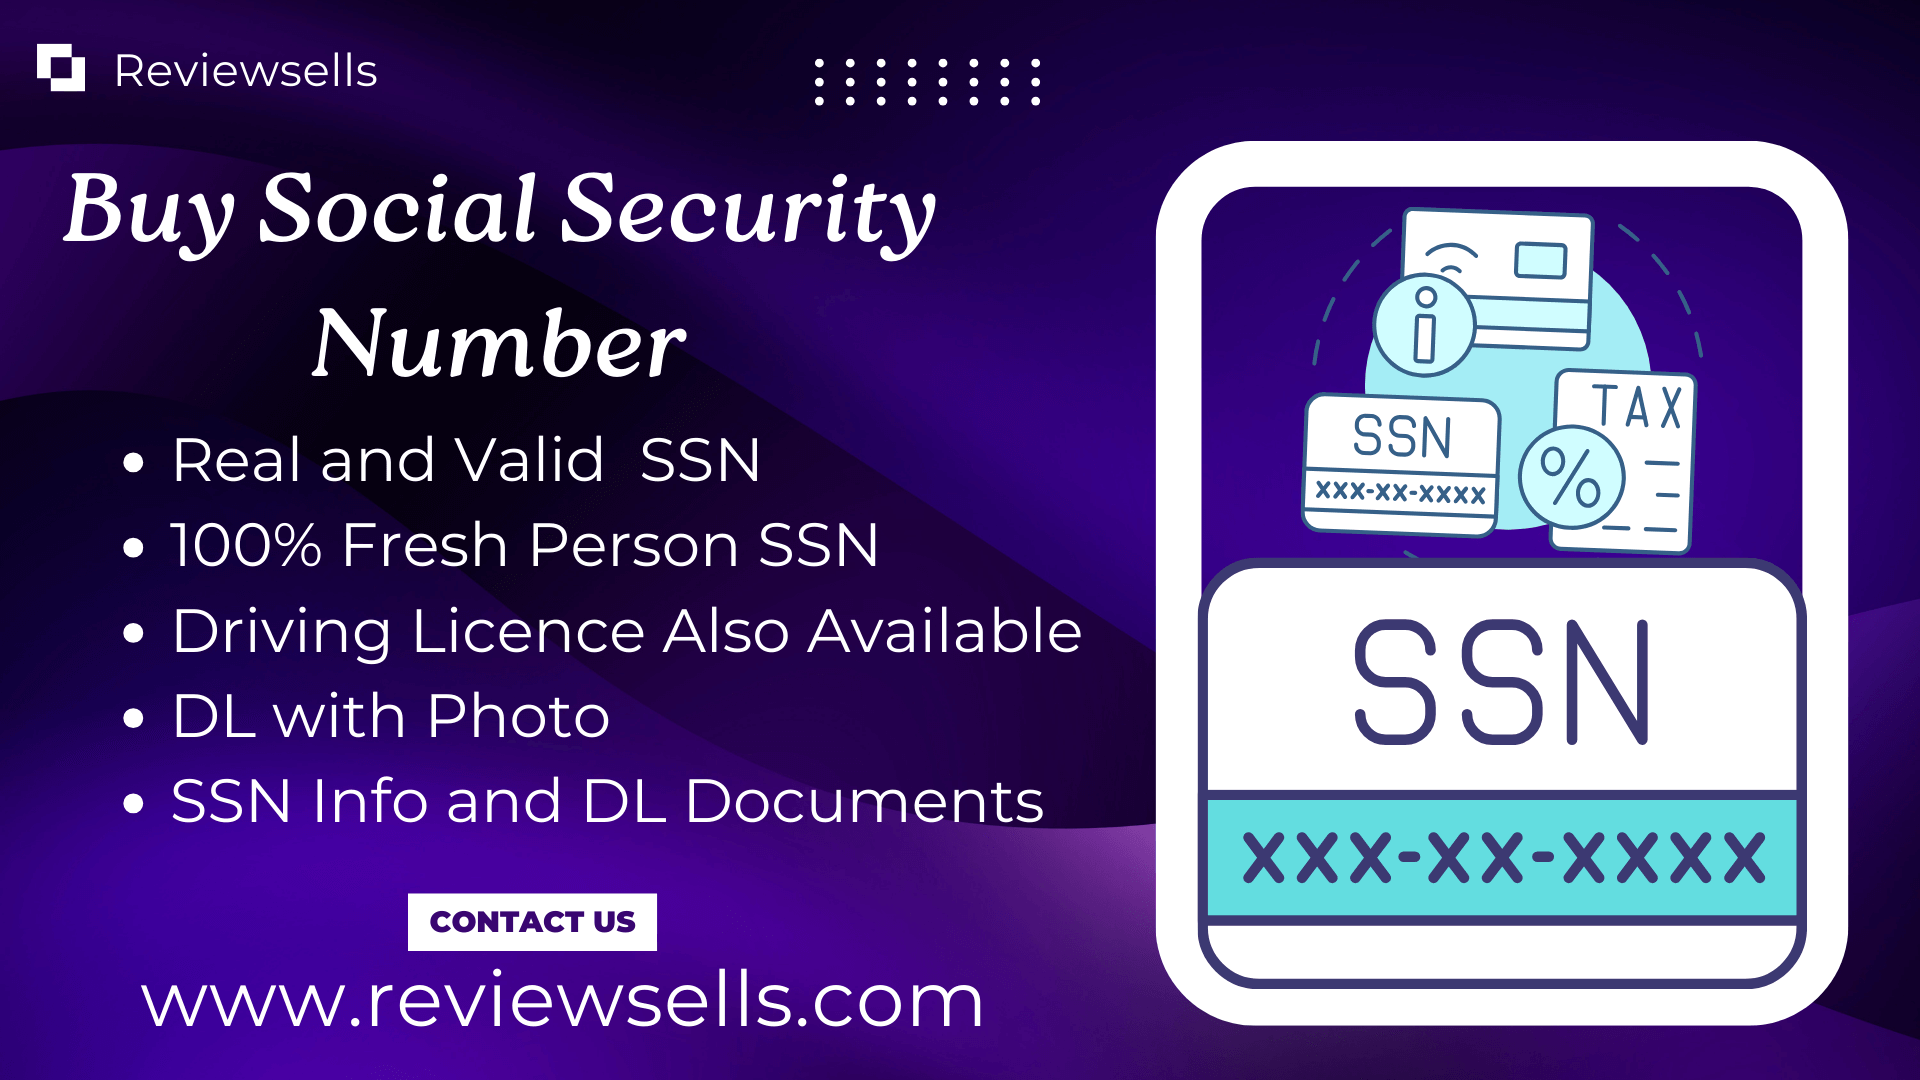 Buy SSN Number - 100% Fresh SSN with Real Driving License